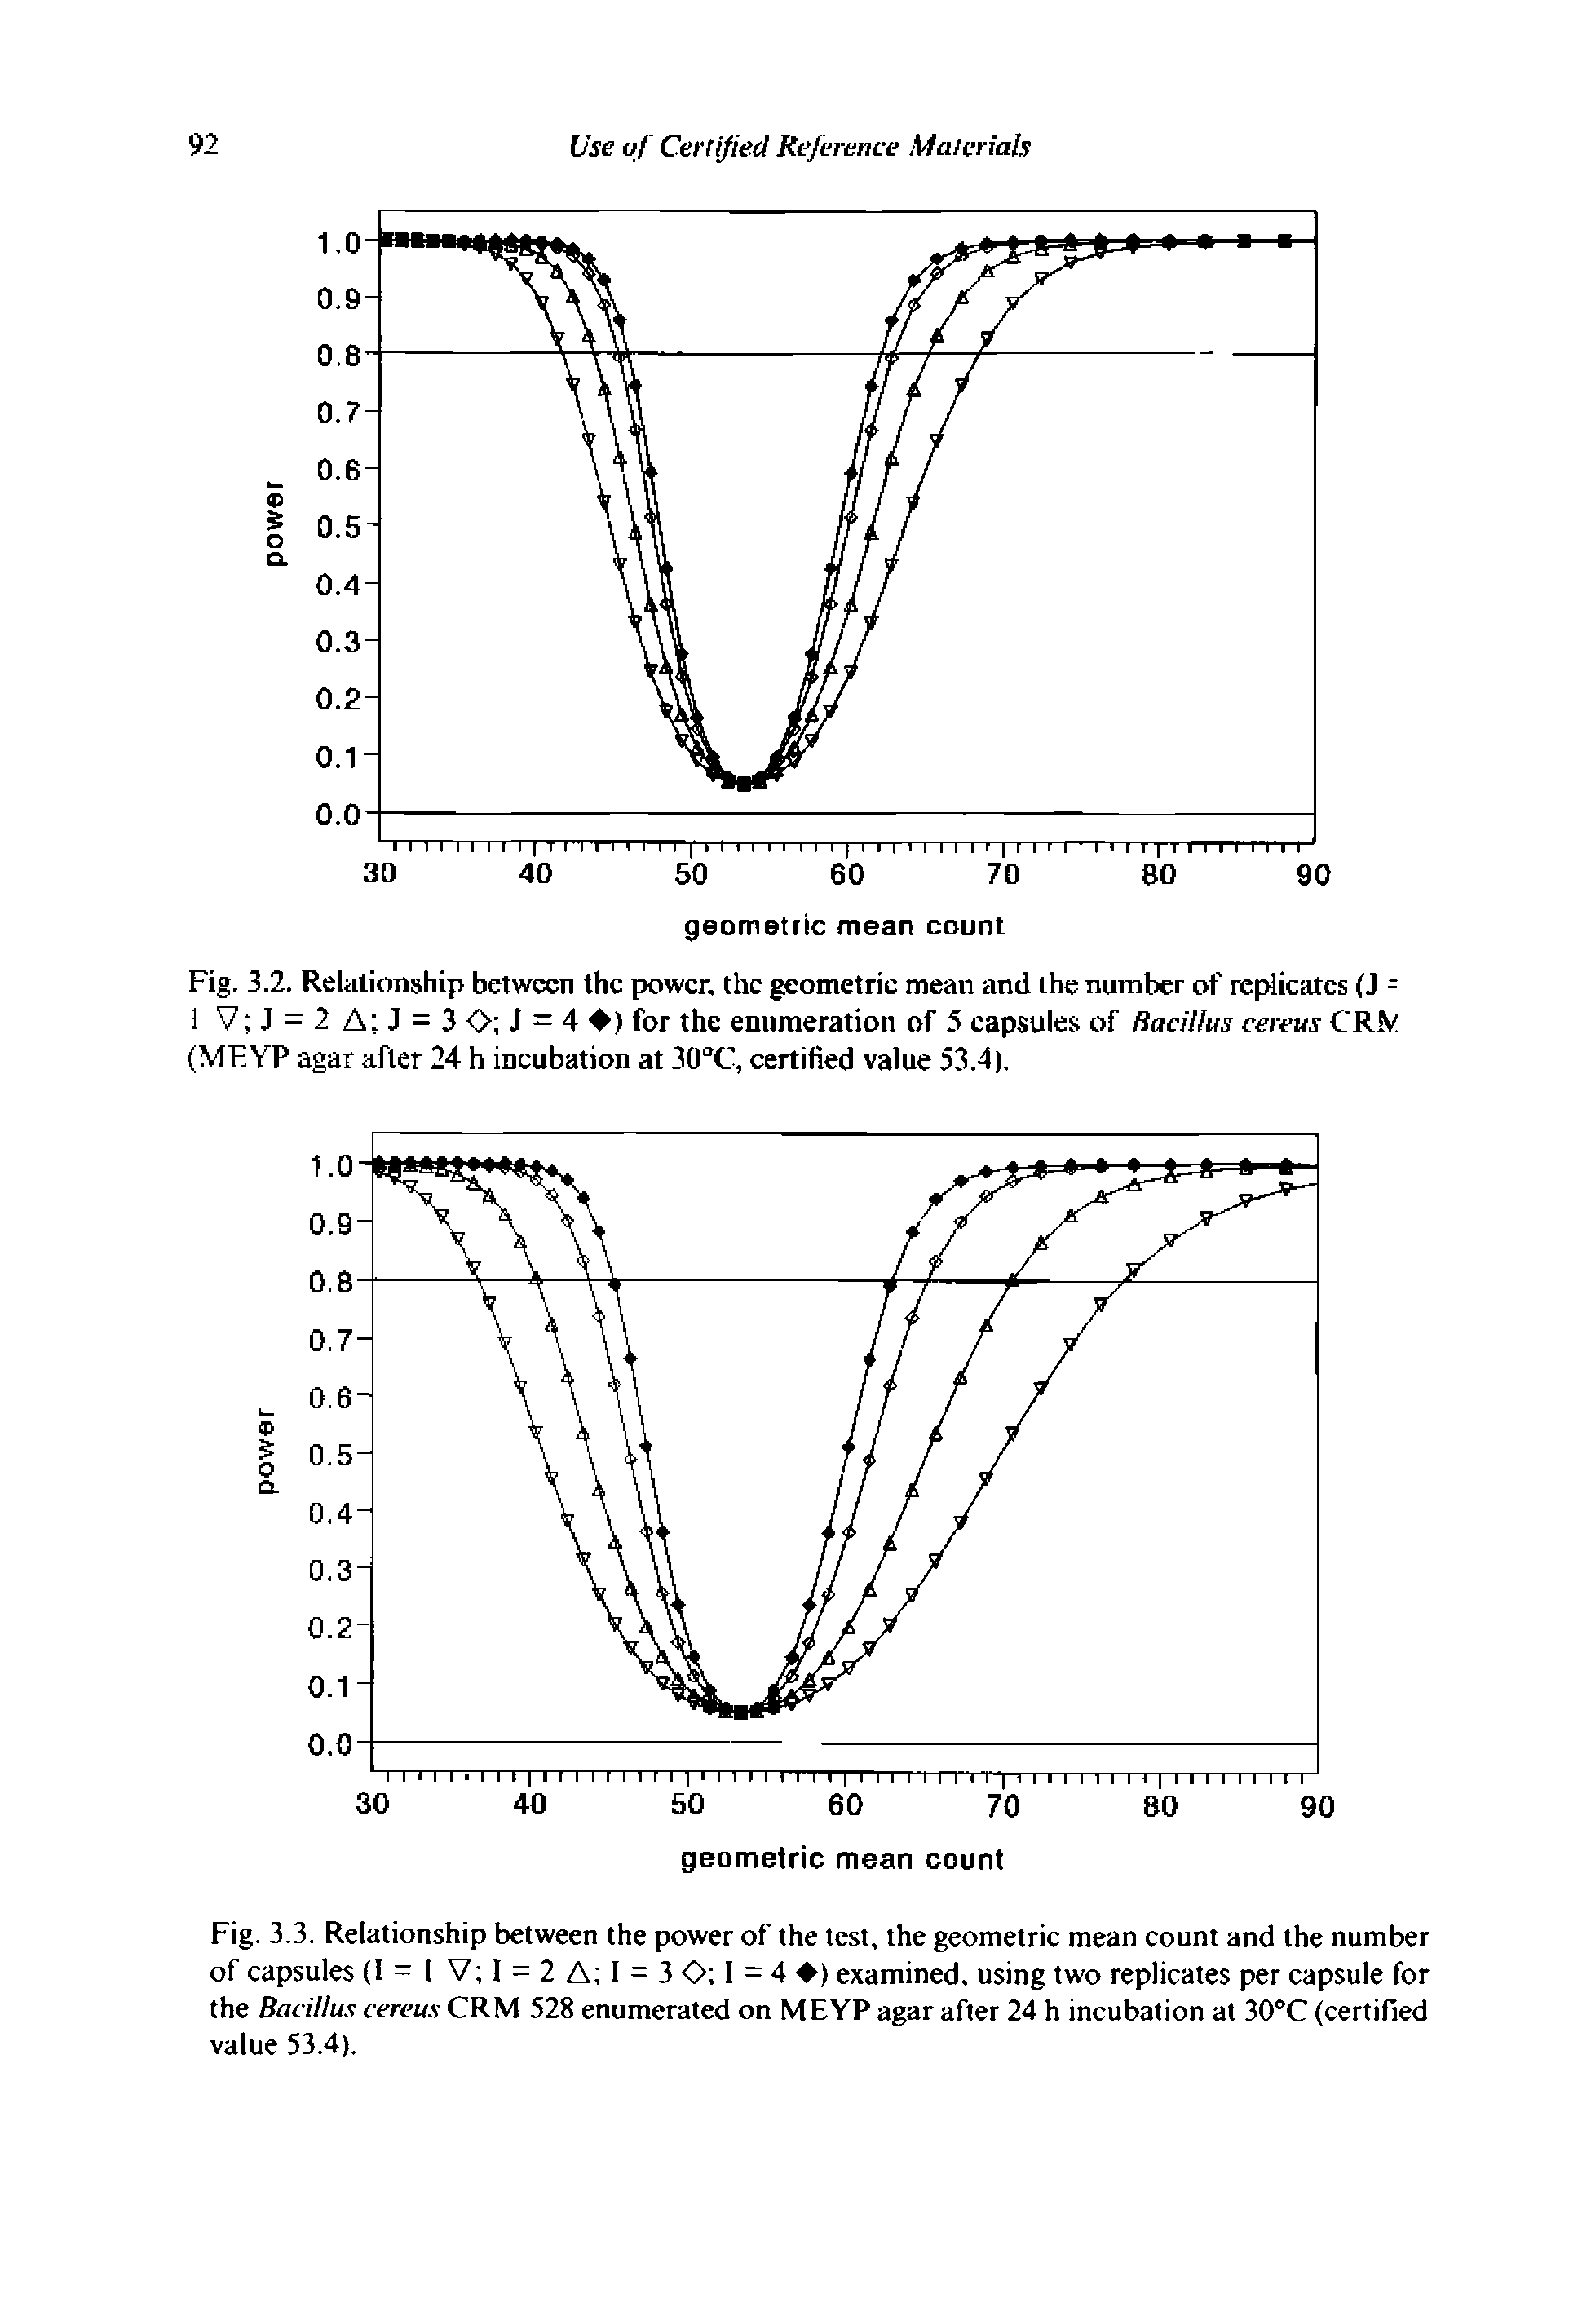 Fig. 3.3. Relationship between the power of the test, the geometric mean count and the number of capsules (1= I V I = 2A I = 3 0 I=4 ) examined, using two replicates per capsule for the Bacillus cereus CRM 528 enumerated on MEYP agar after 24 h incubation at 30 C (certified value 53.4).